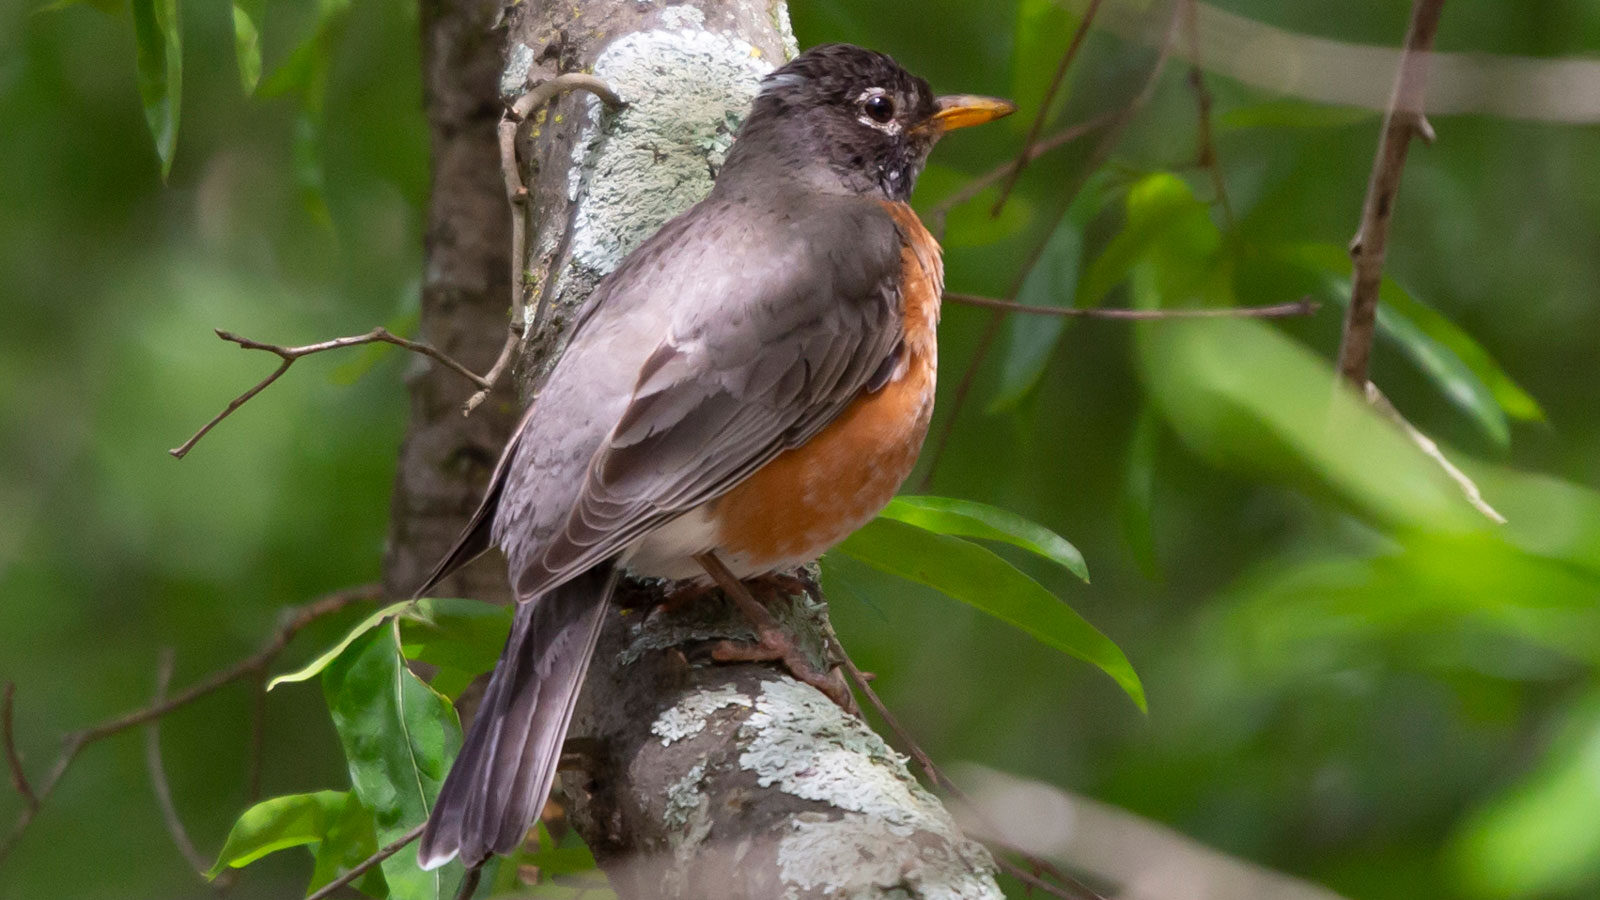 American robin looking out from its perch on a branch